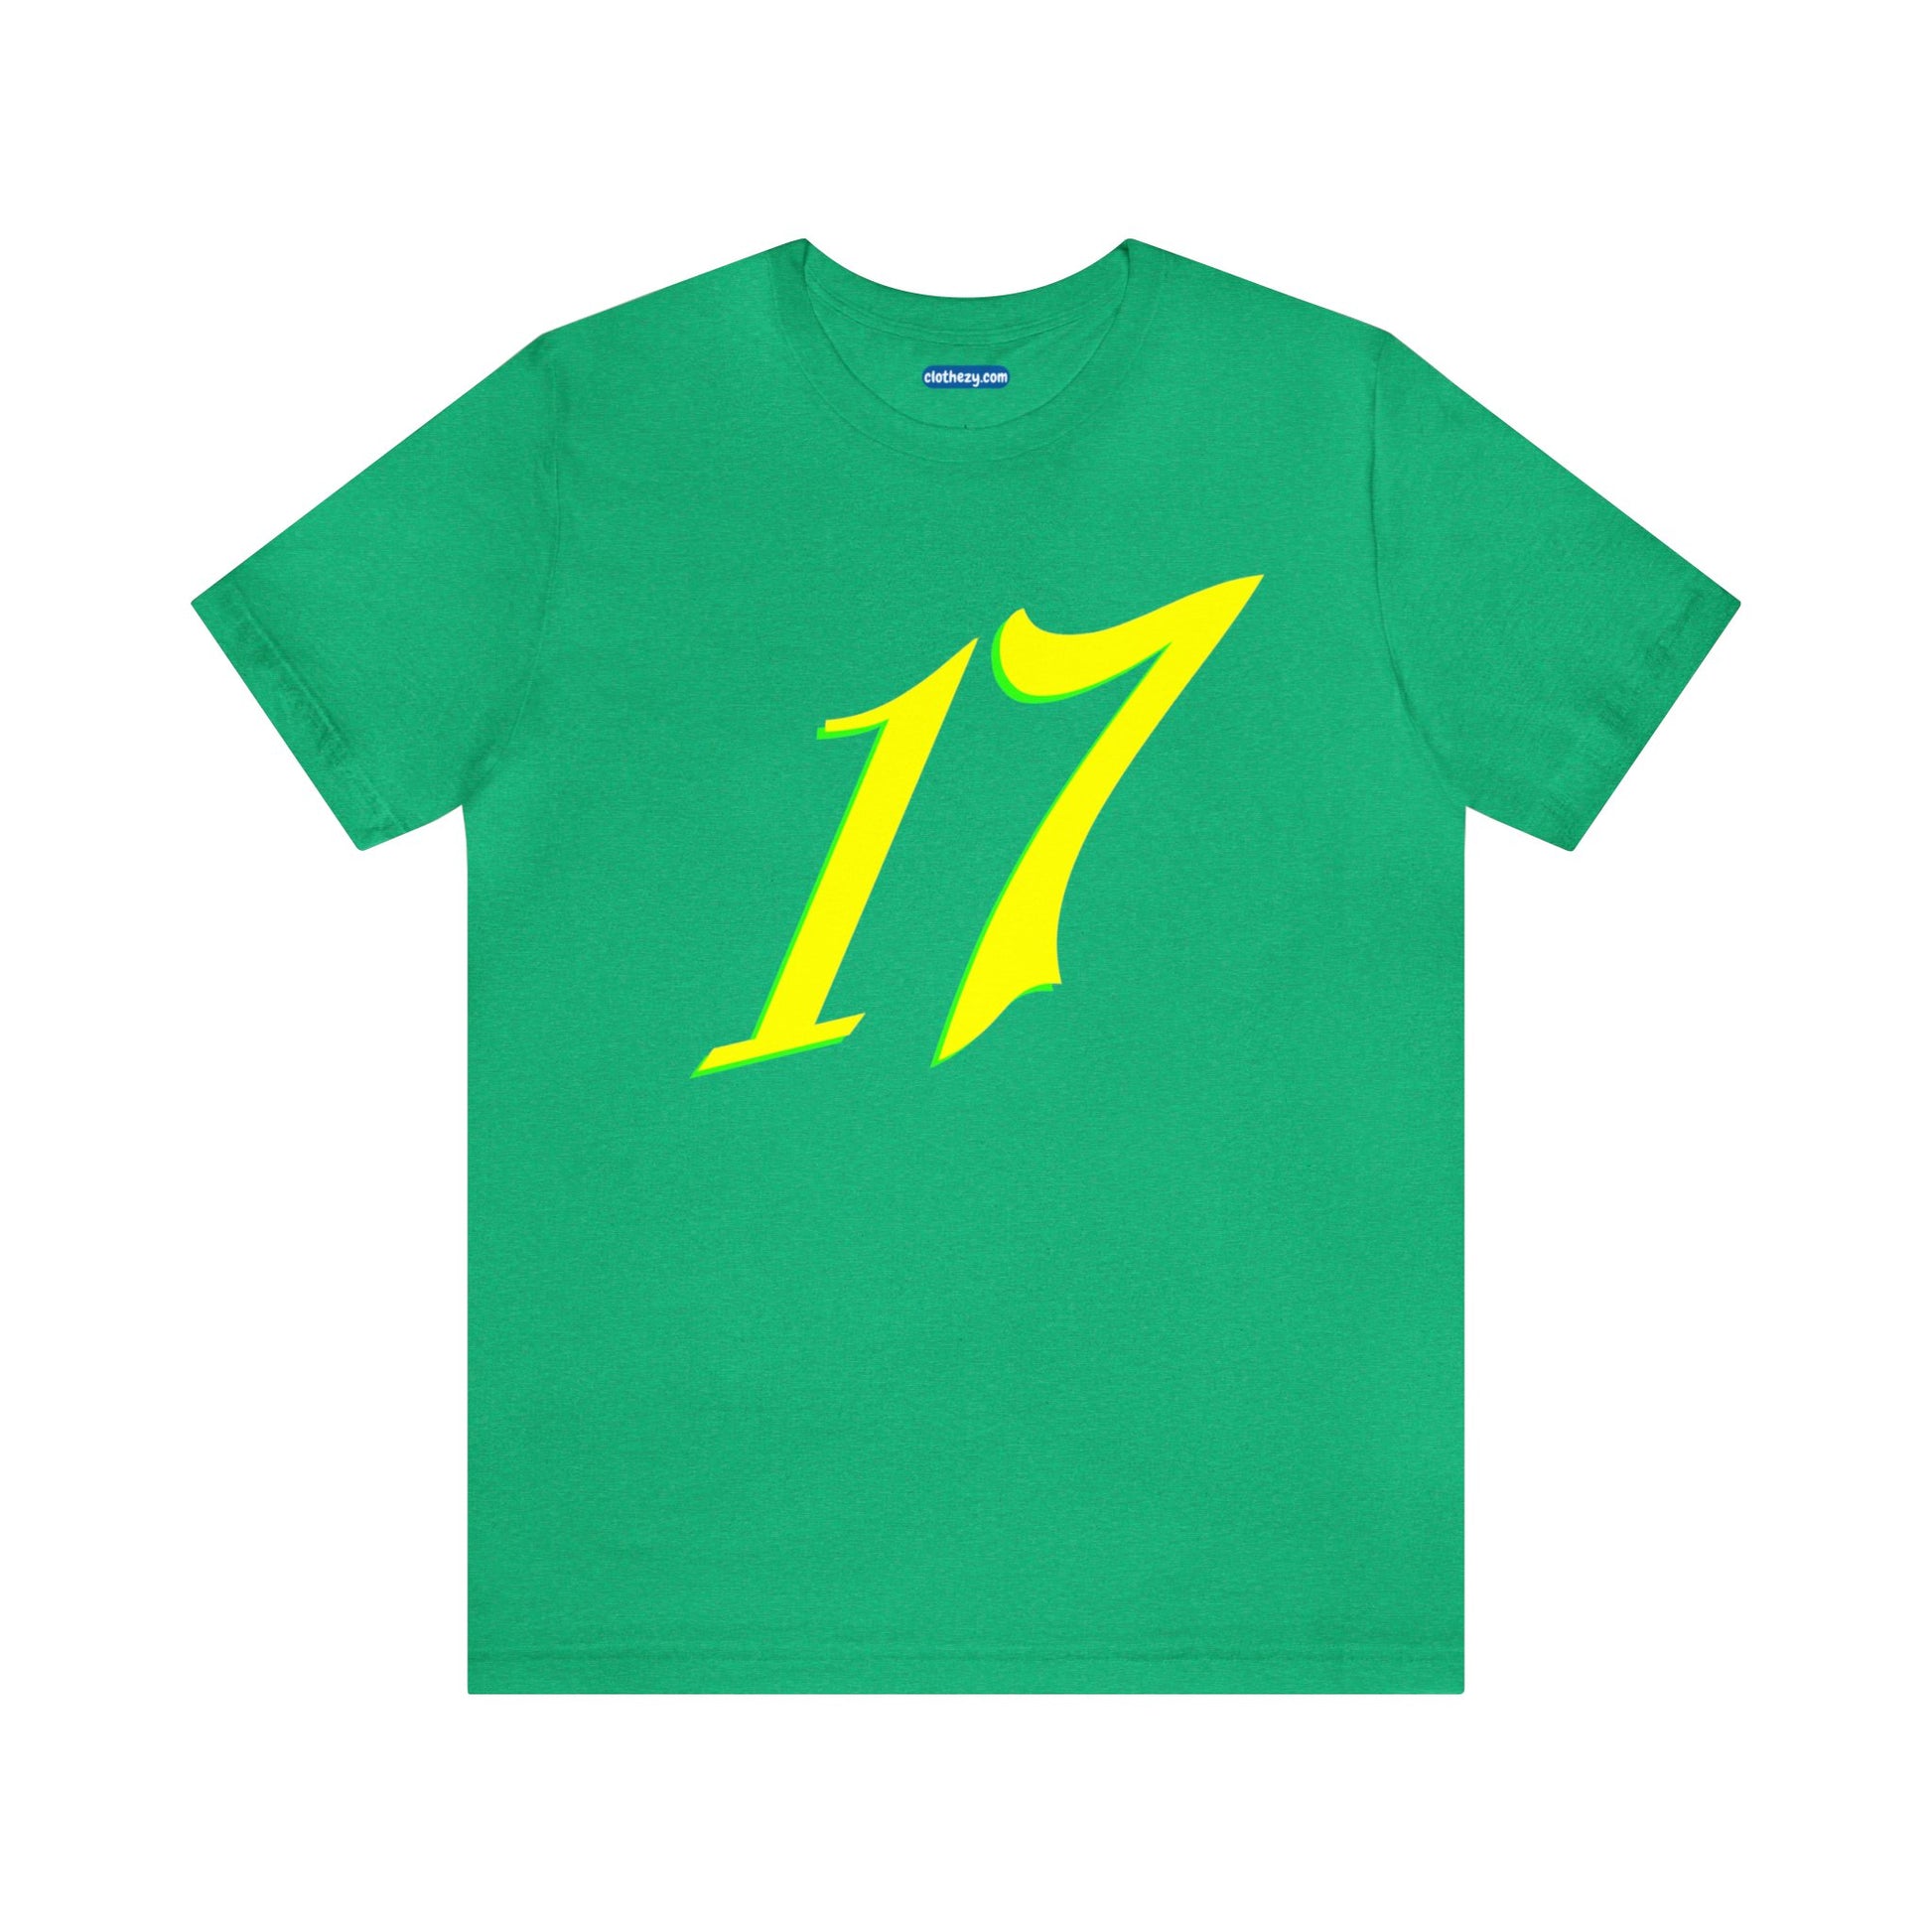 Number 17 Design - Soft Cotton Tee for birthdays and celebrations, Gift for friends and family, Multiple Options by clothezy.com in Royal Blue Heather Size Small - Buy Now